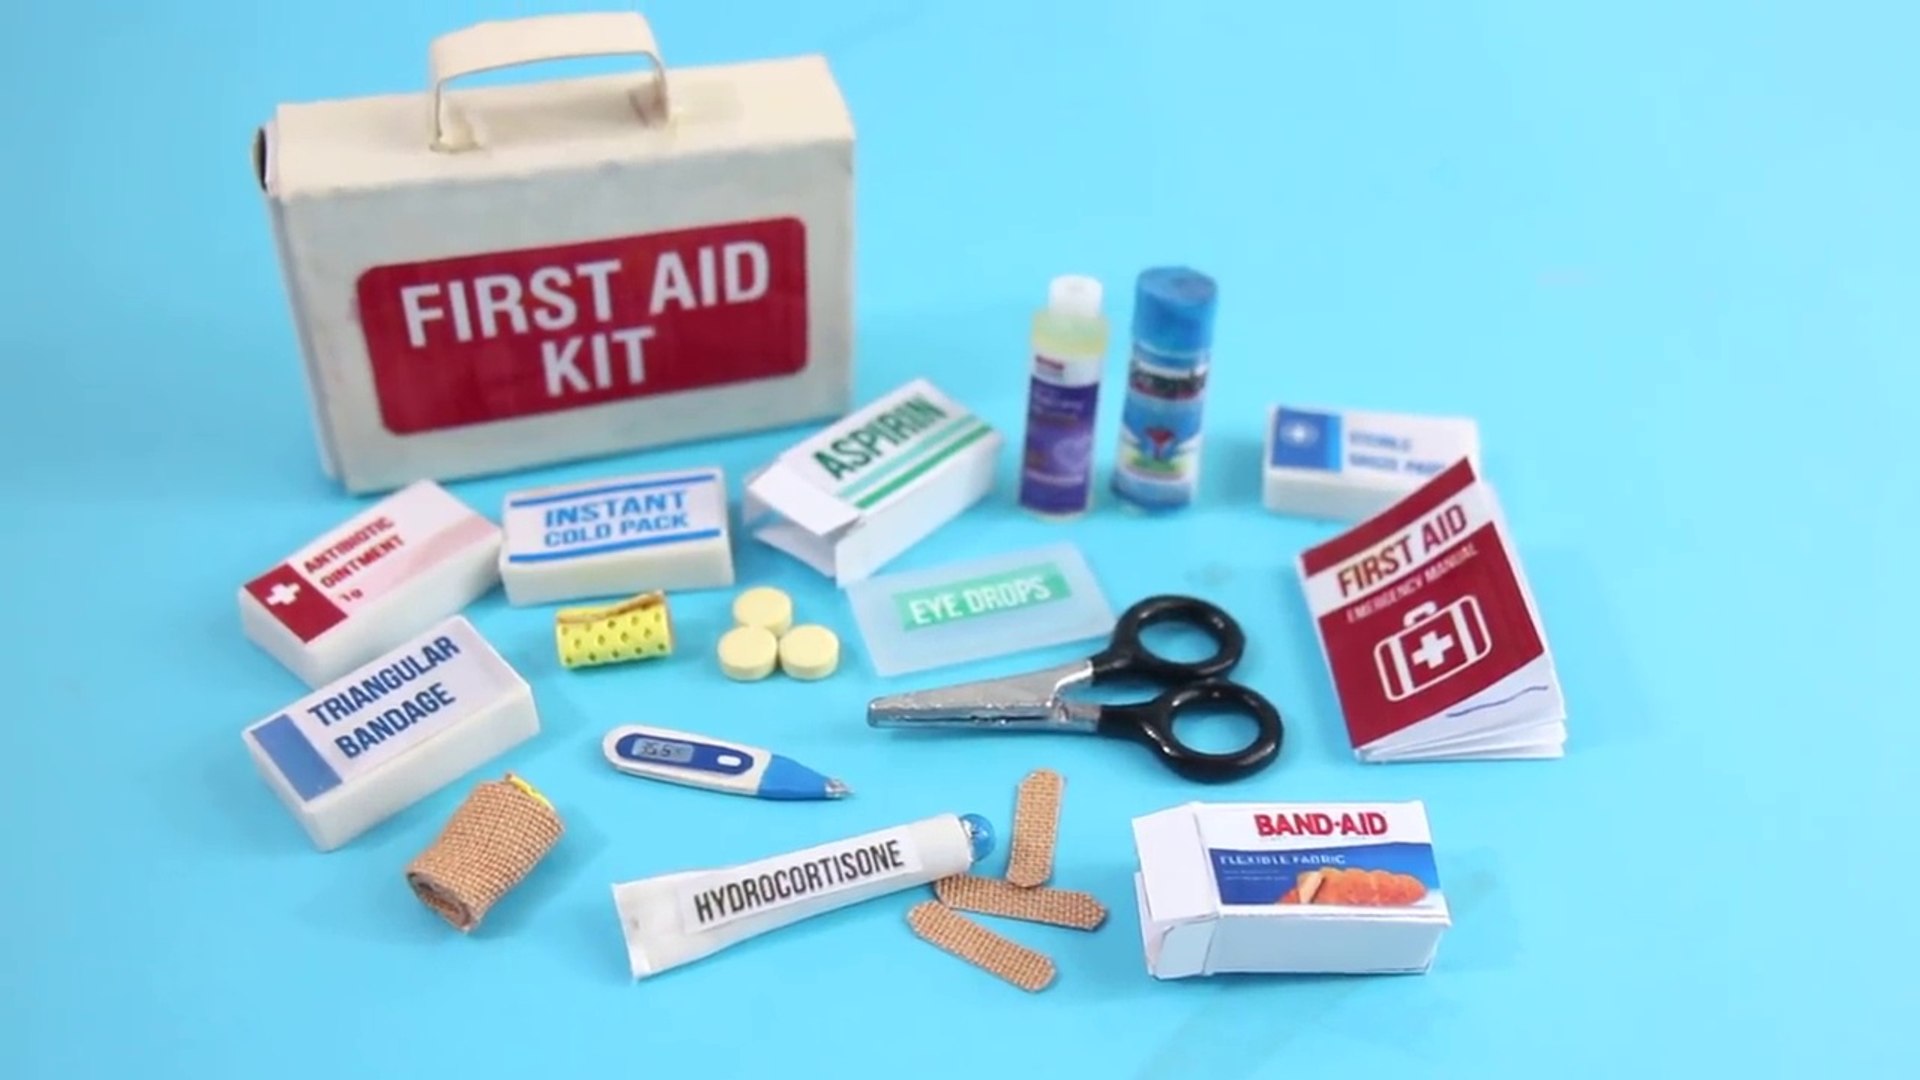 DIY Miniature First Aid Kit - Accessories, Band Aids, Thermometer, Medicine  - DIY Tutorial - video Dailymotion